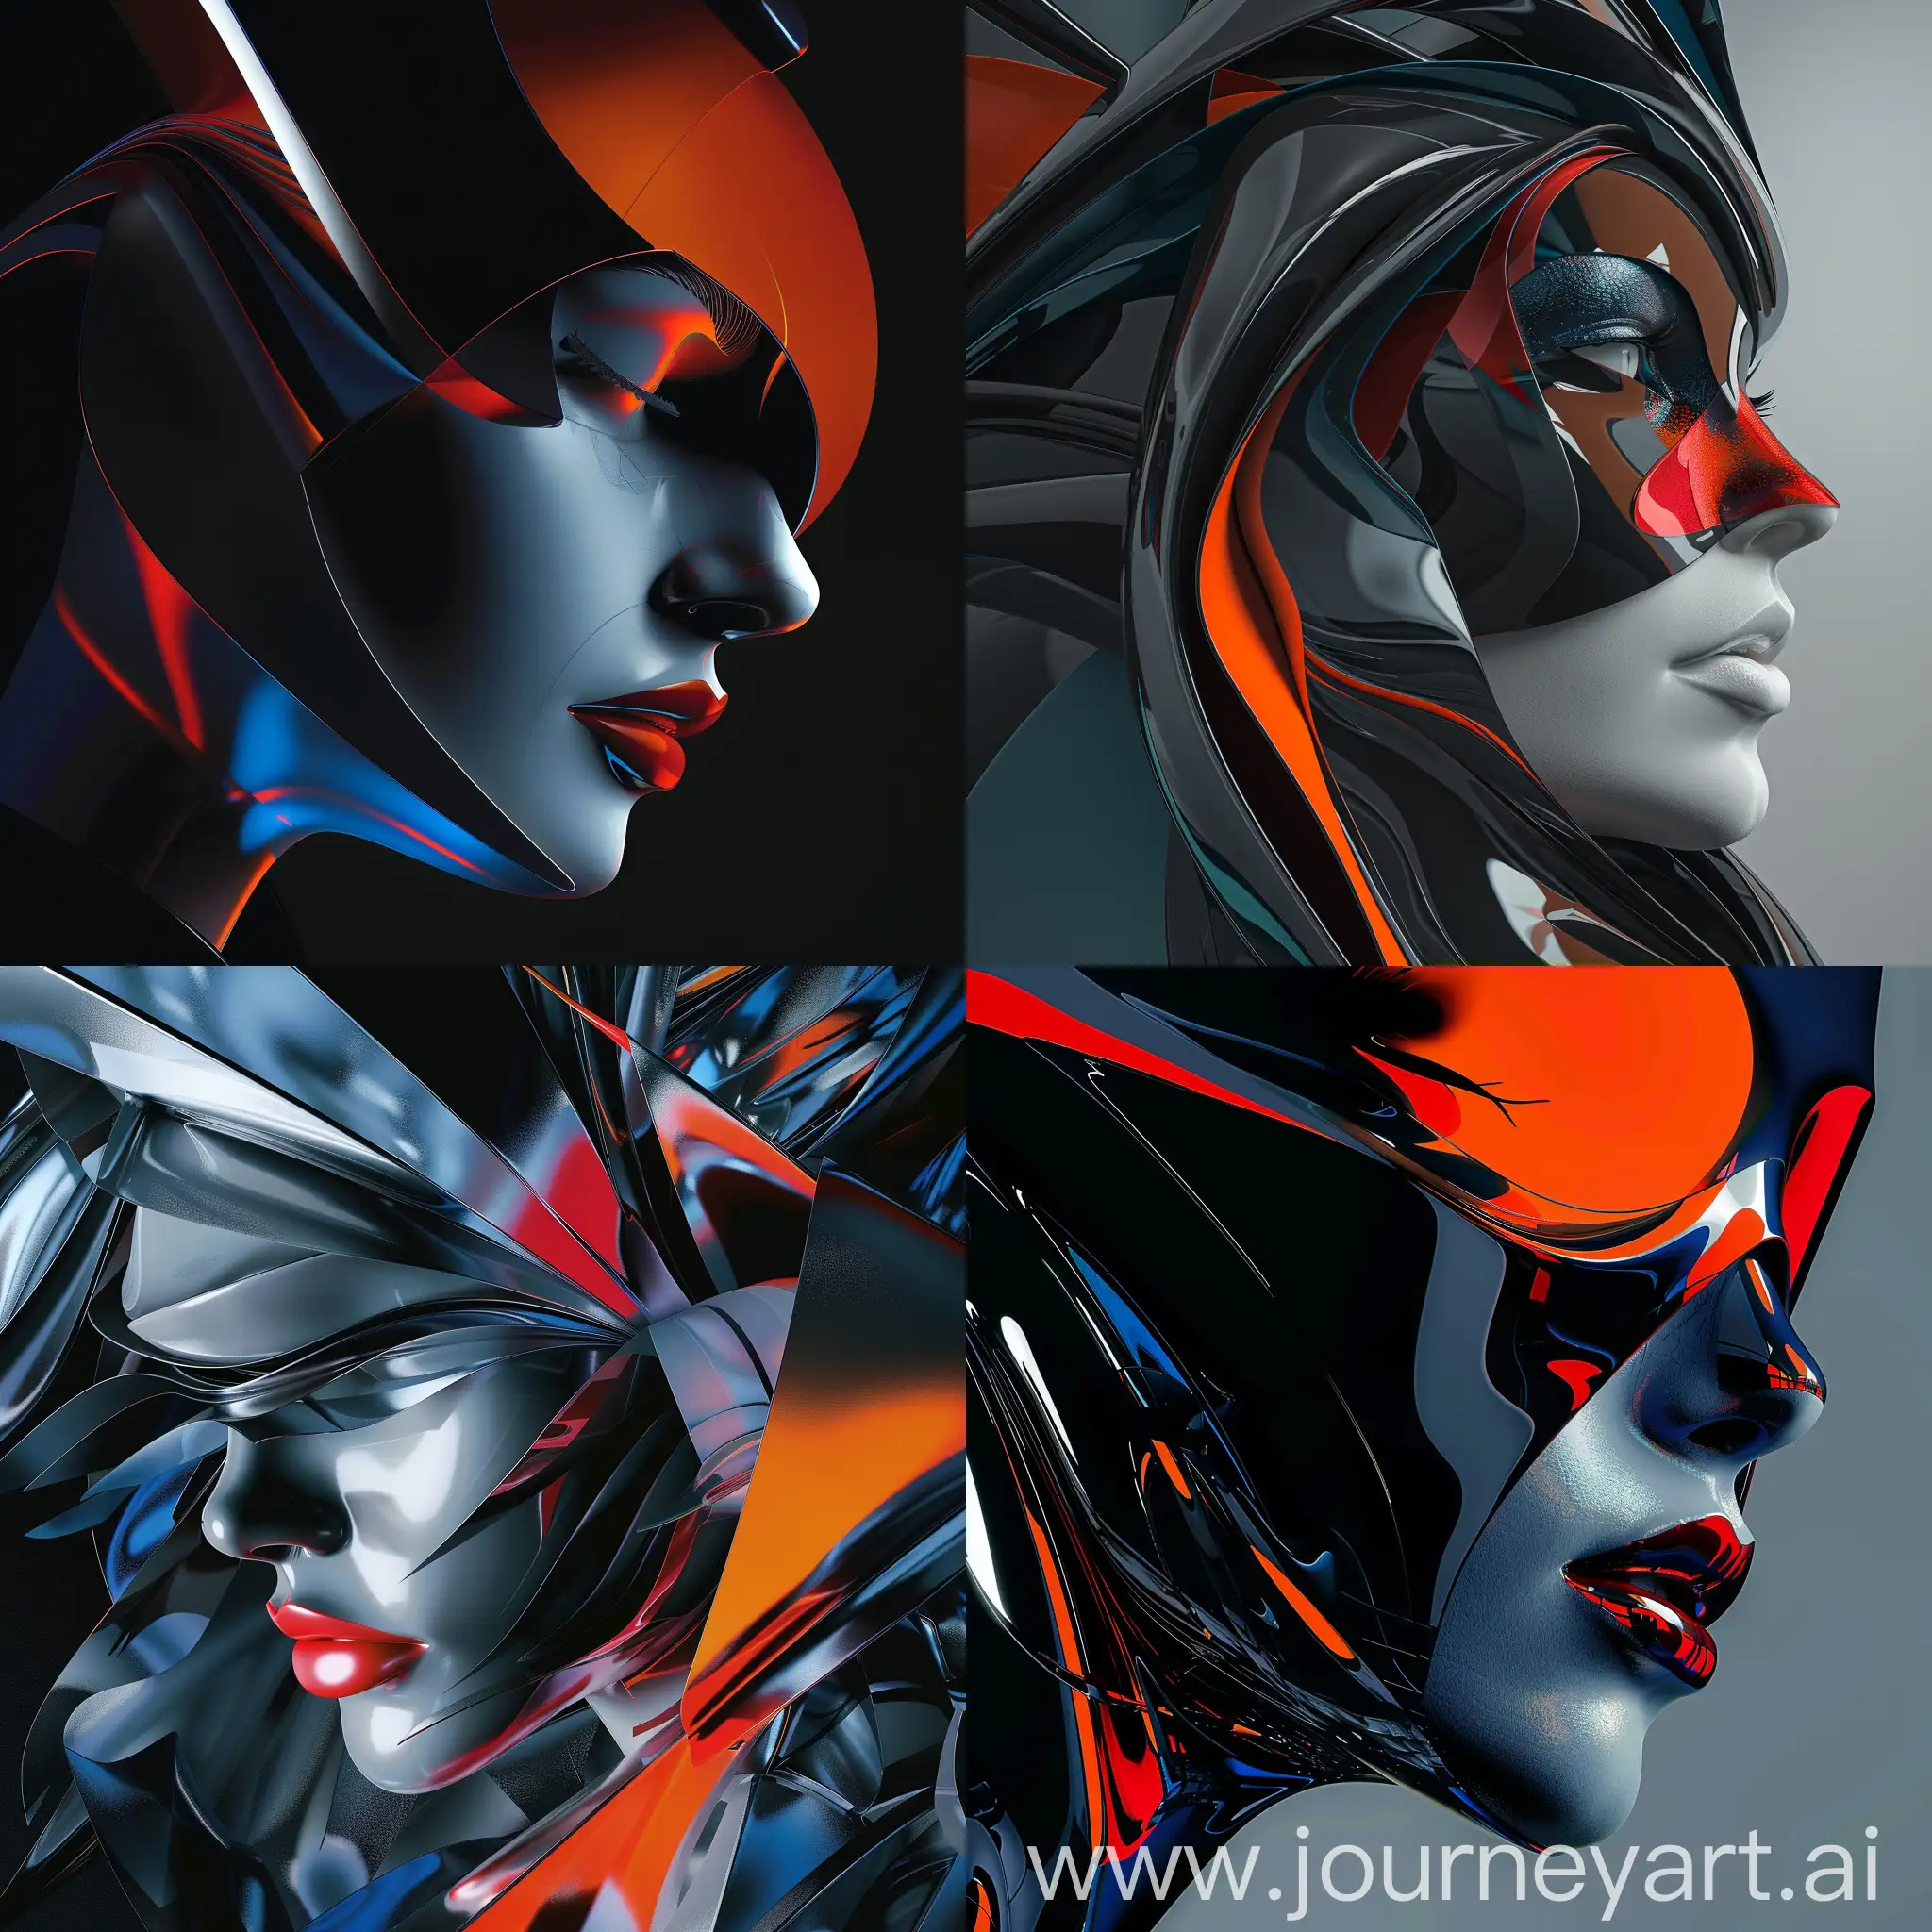 Modern-Abstract-Portrait-of-Woman-in-Red-Black-and-Blue-3D-Style-with-Chrome-Highlights